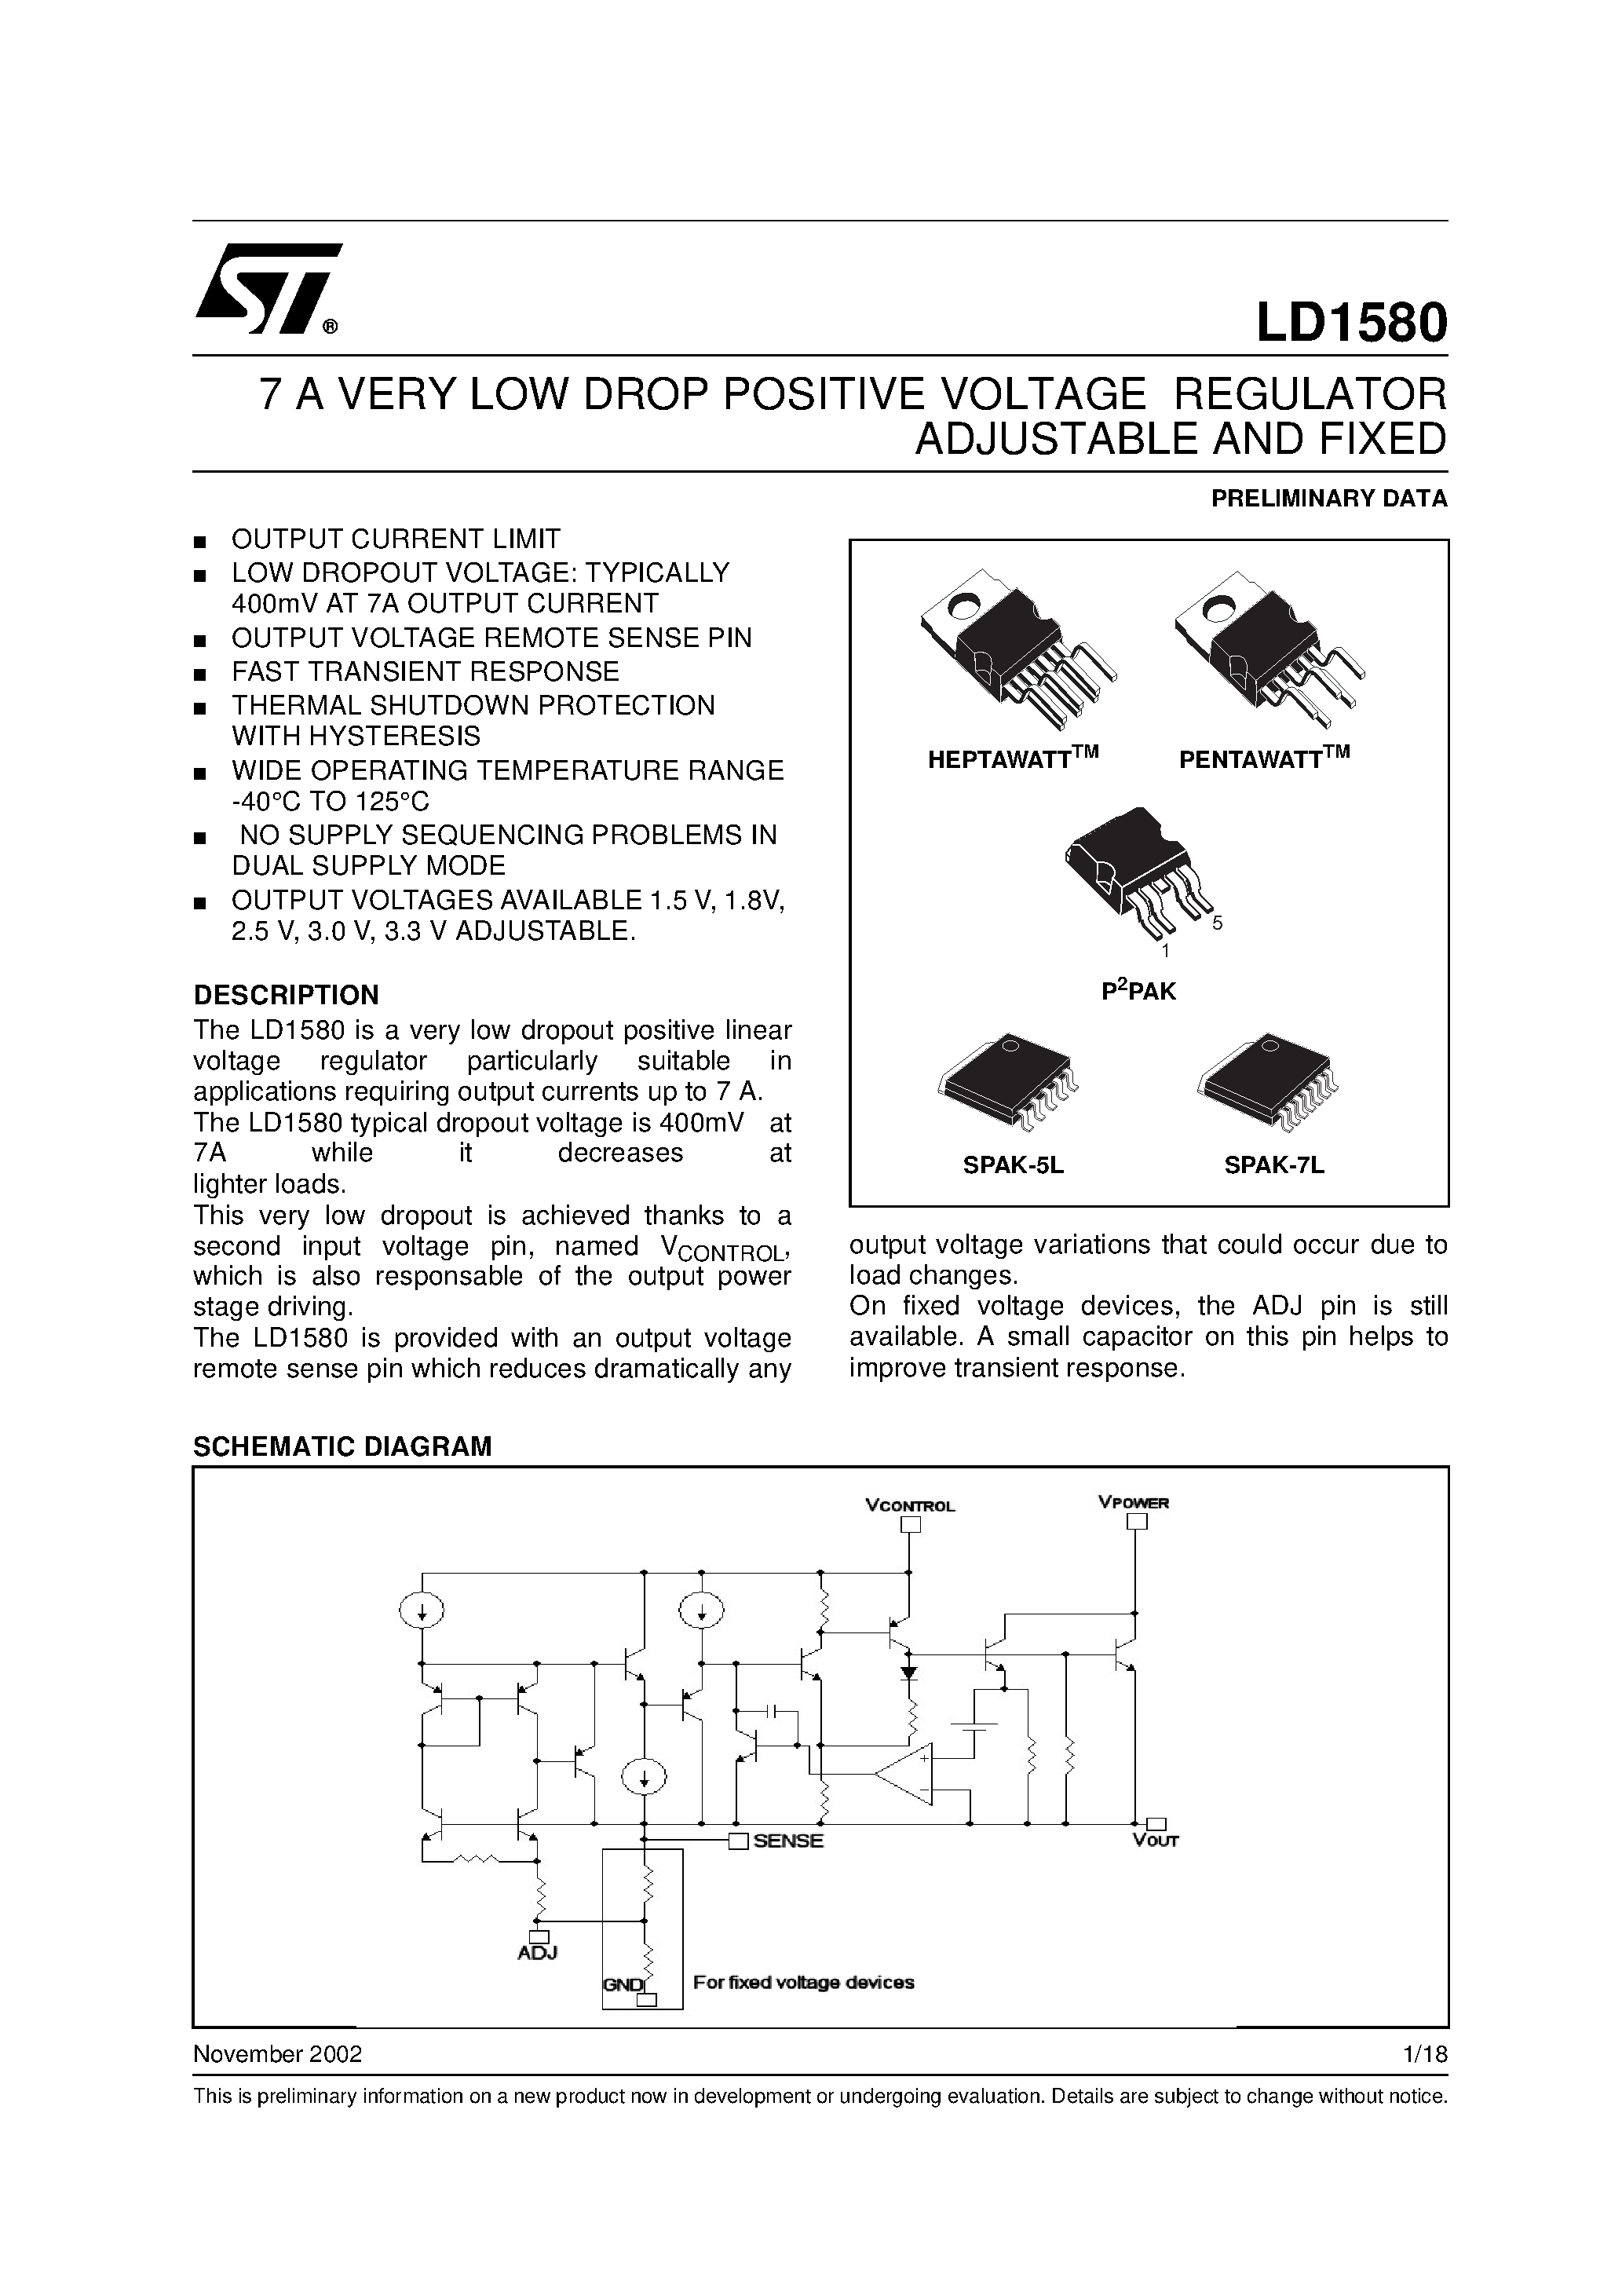 Datasheet LD1580 - 7 A VERY LOW DROP POSITIVE VOLTAGE REGULATOR ADJUSTABLE AND FIXED page 1